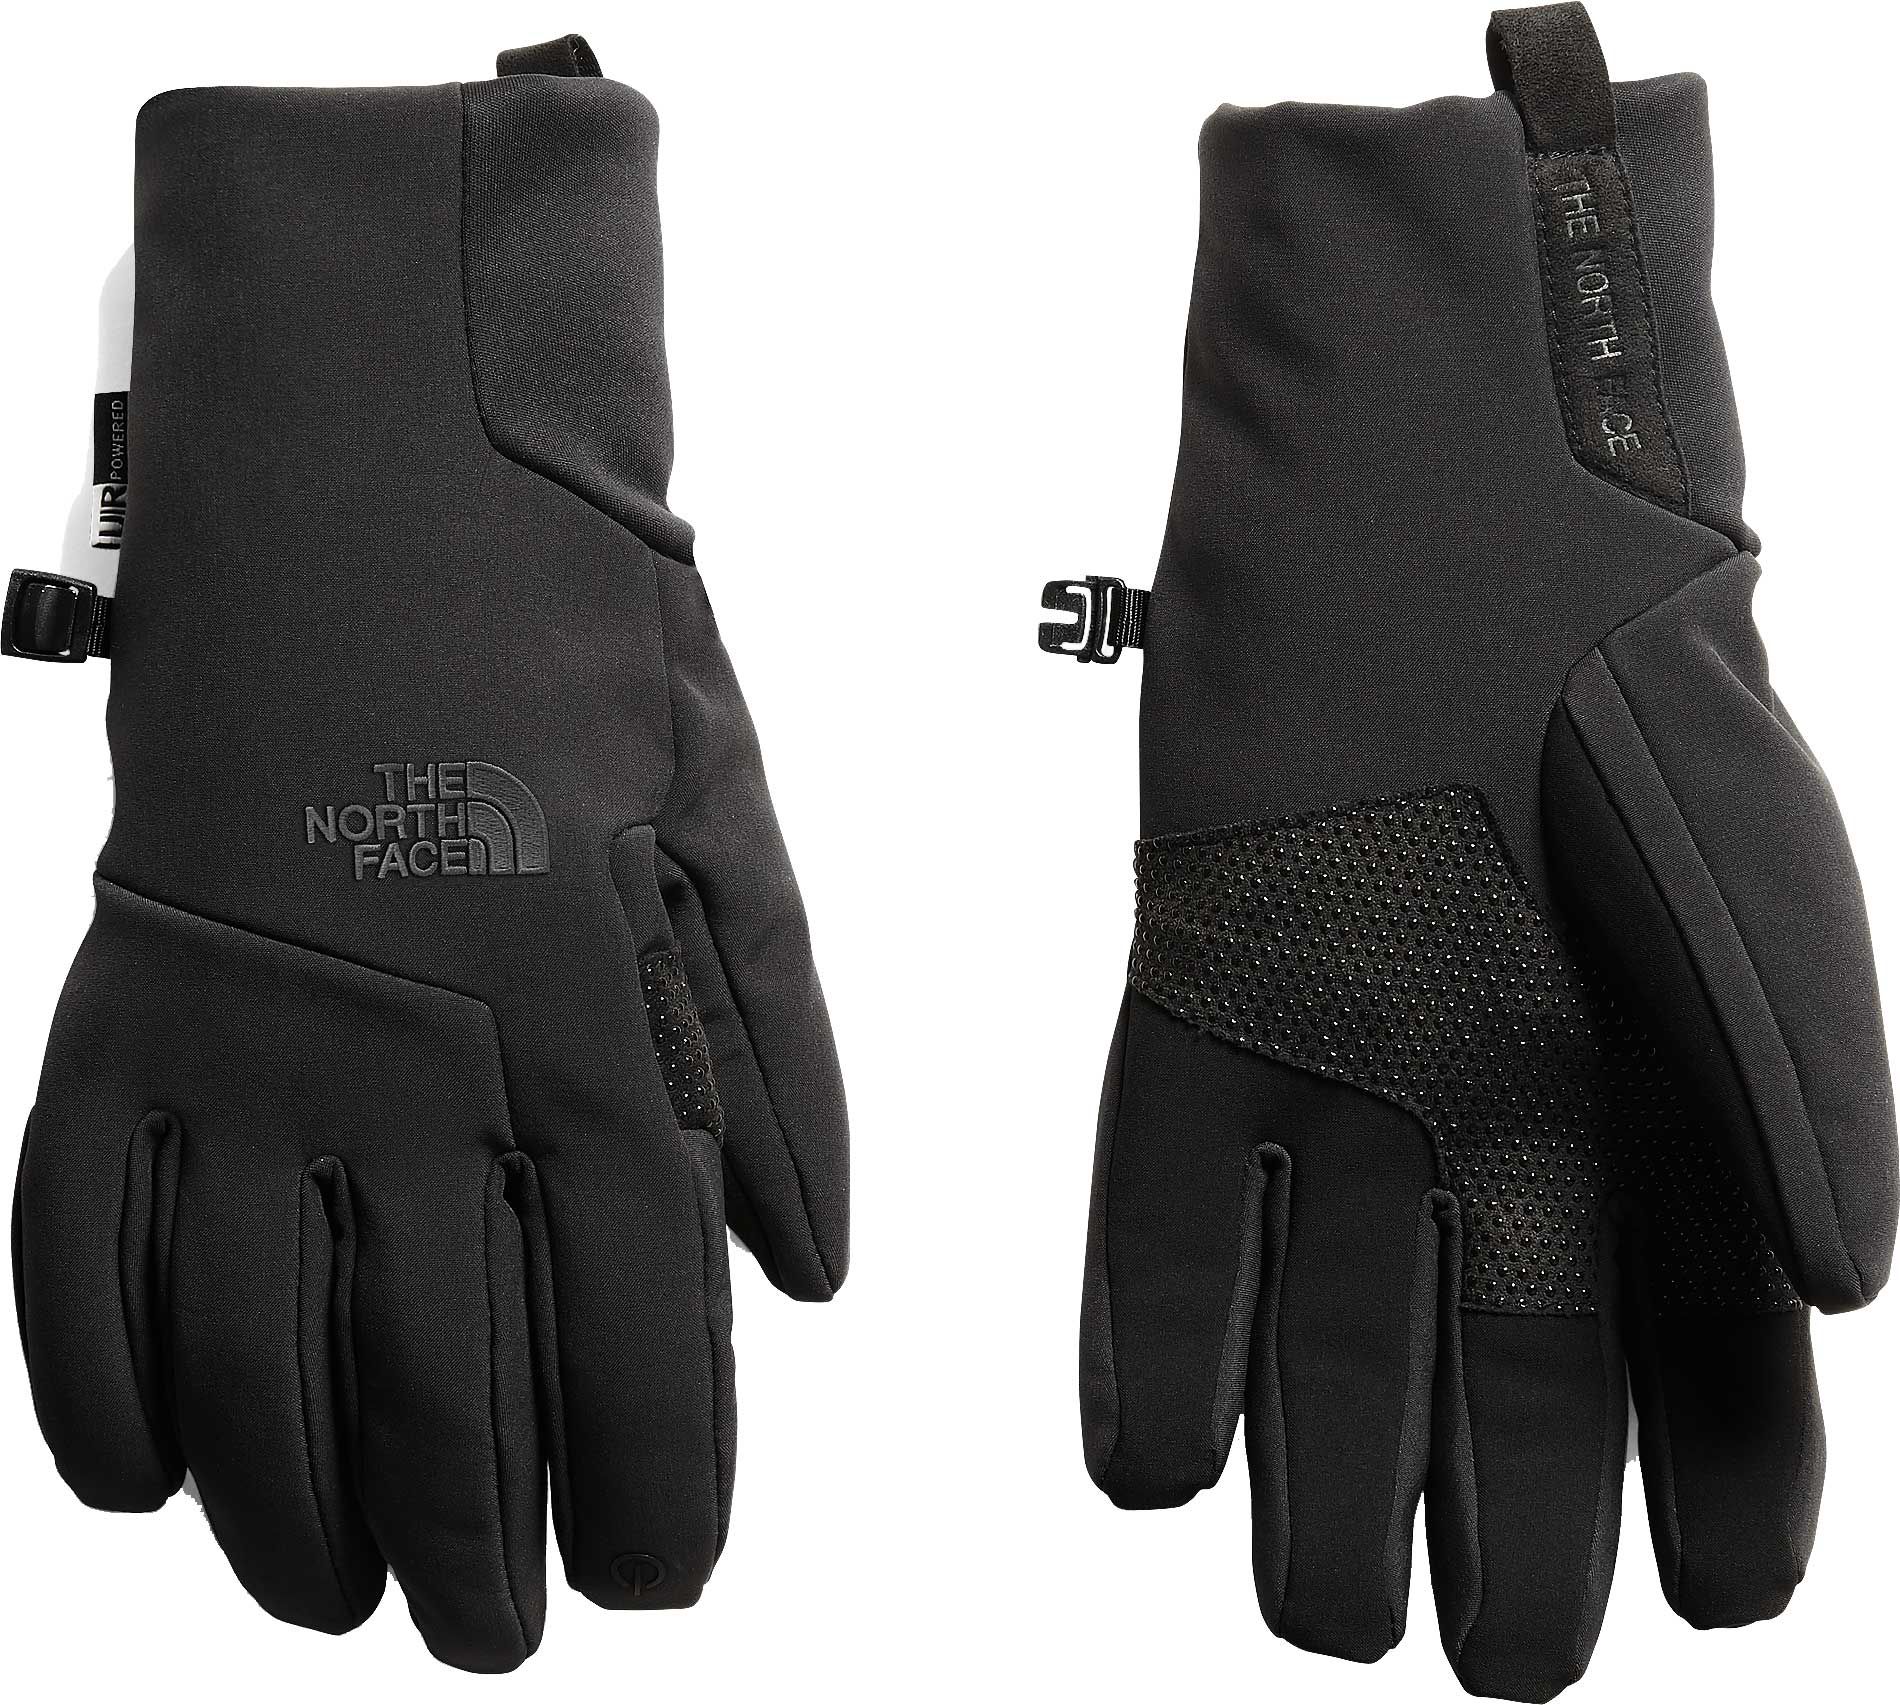 The North Face Gloves \u0026 Mittens 